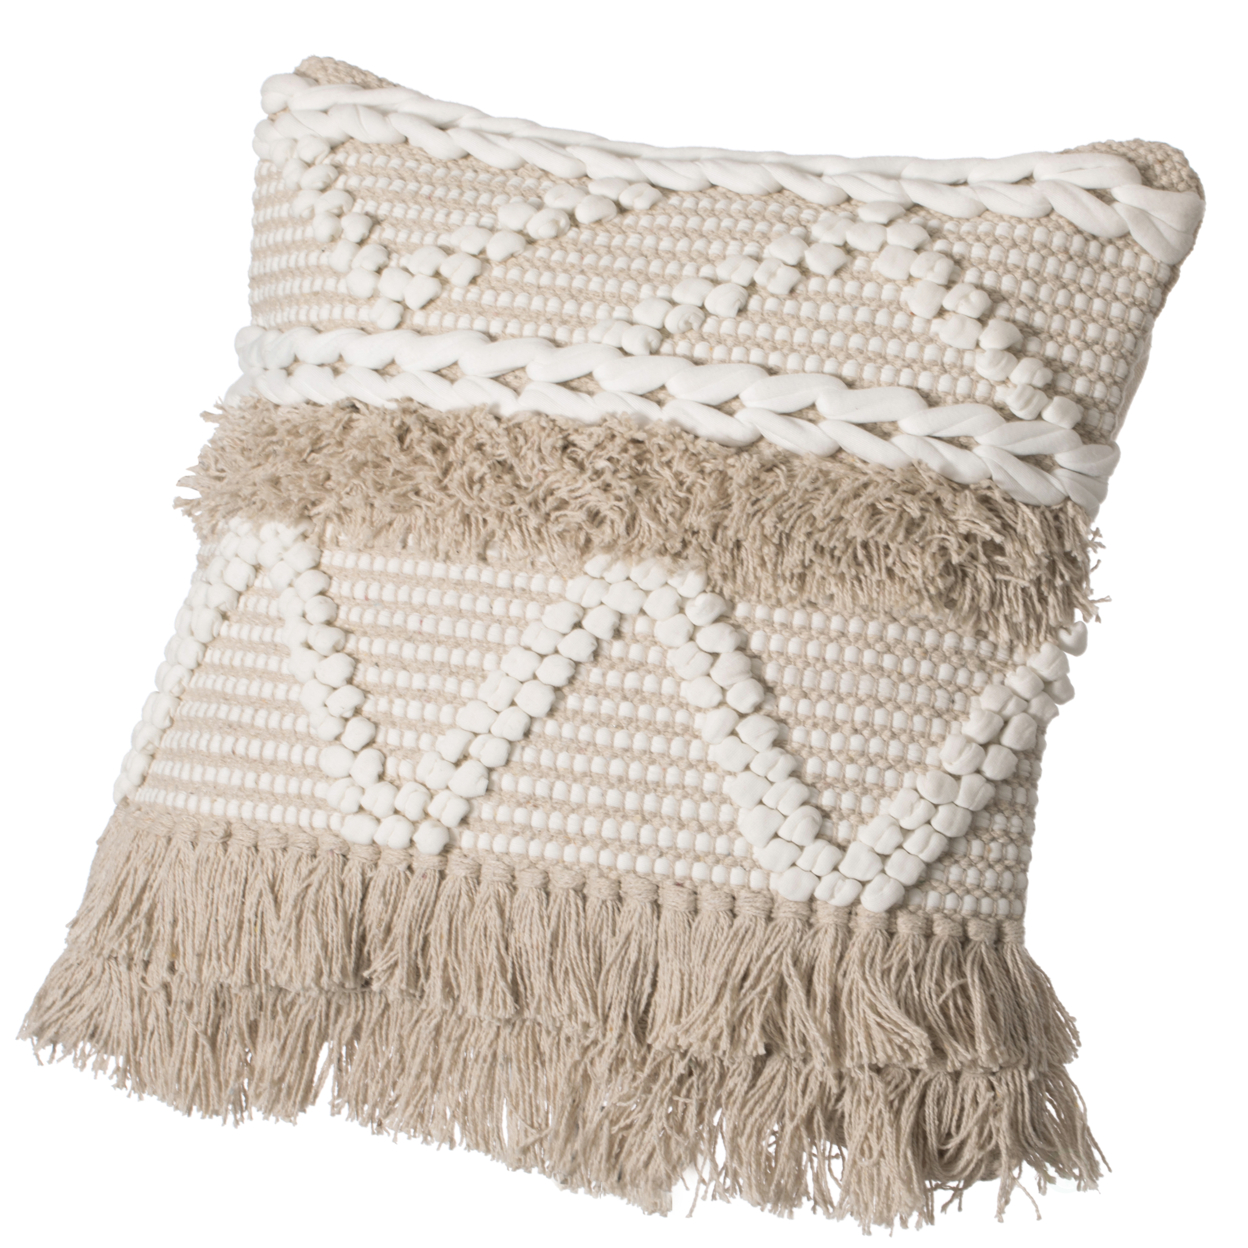 16 Handwoven Cotton Throw Pillow Cover With White Dot Pattern And Natural Tassel Fringe Lines - Pillowcase With Cushion